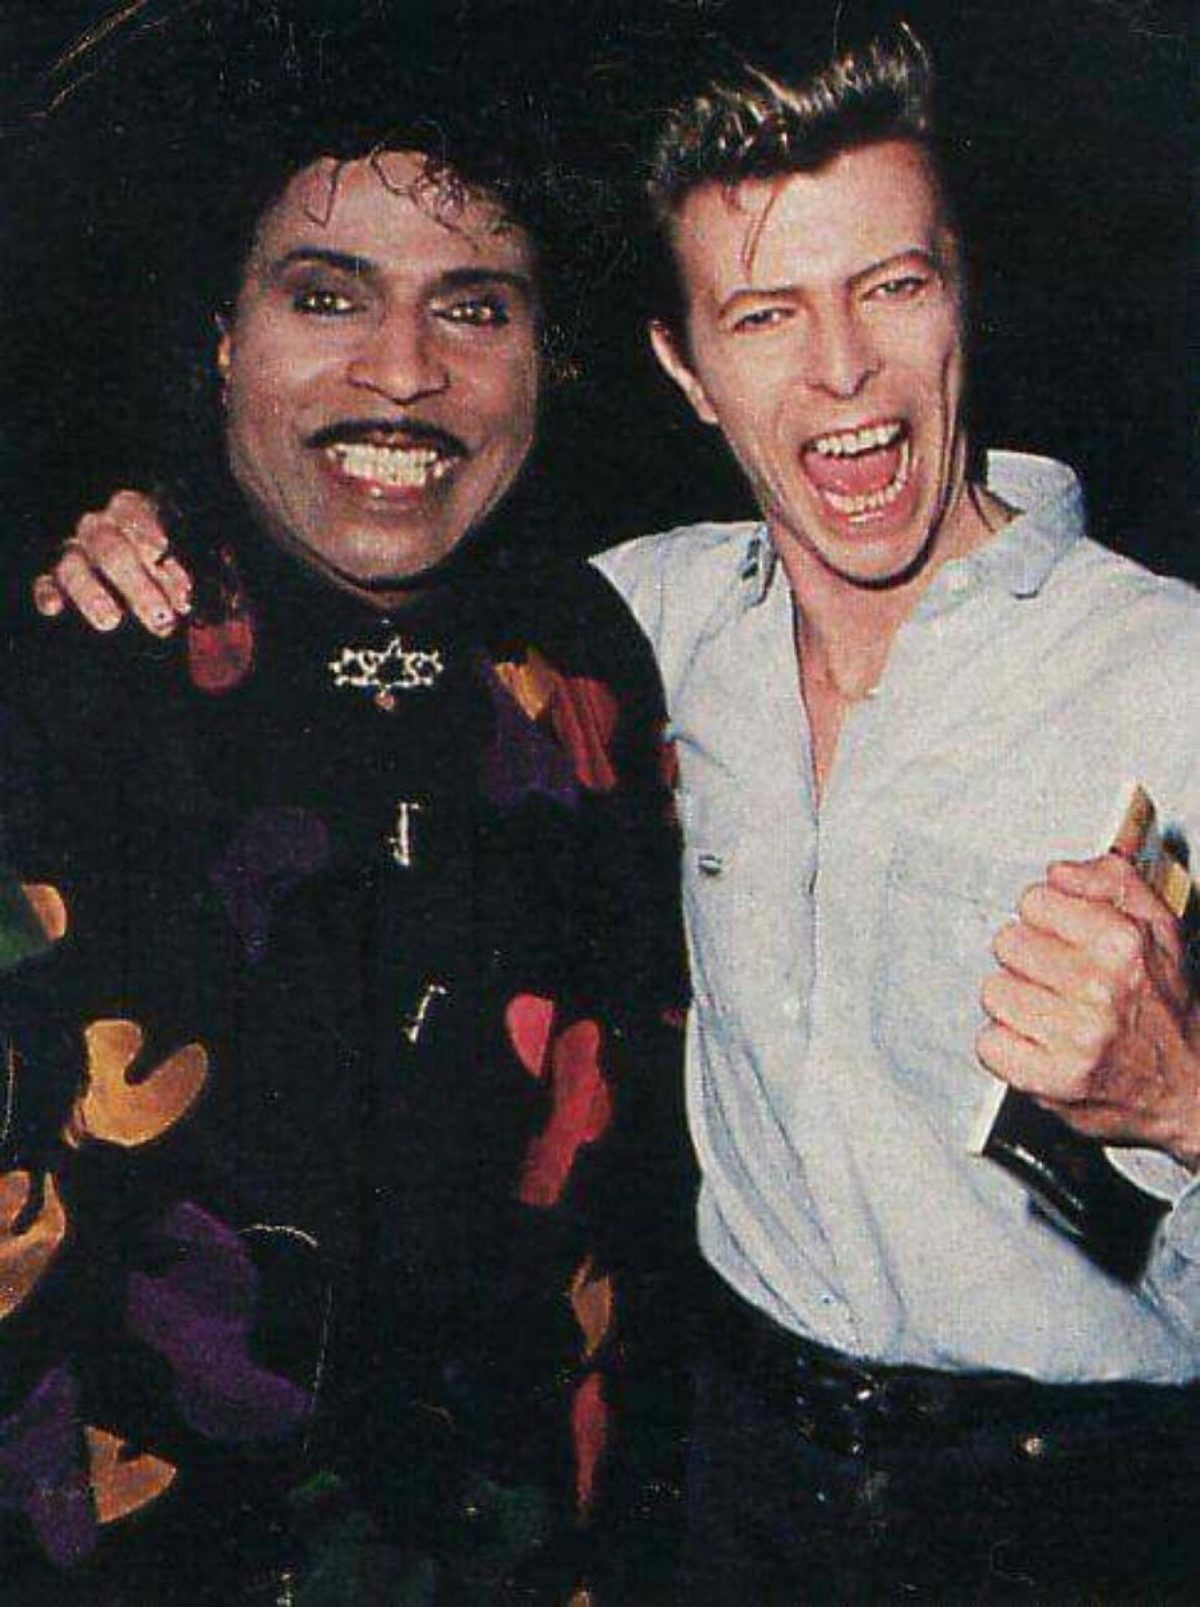 Little Richard and David Bowie